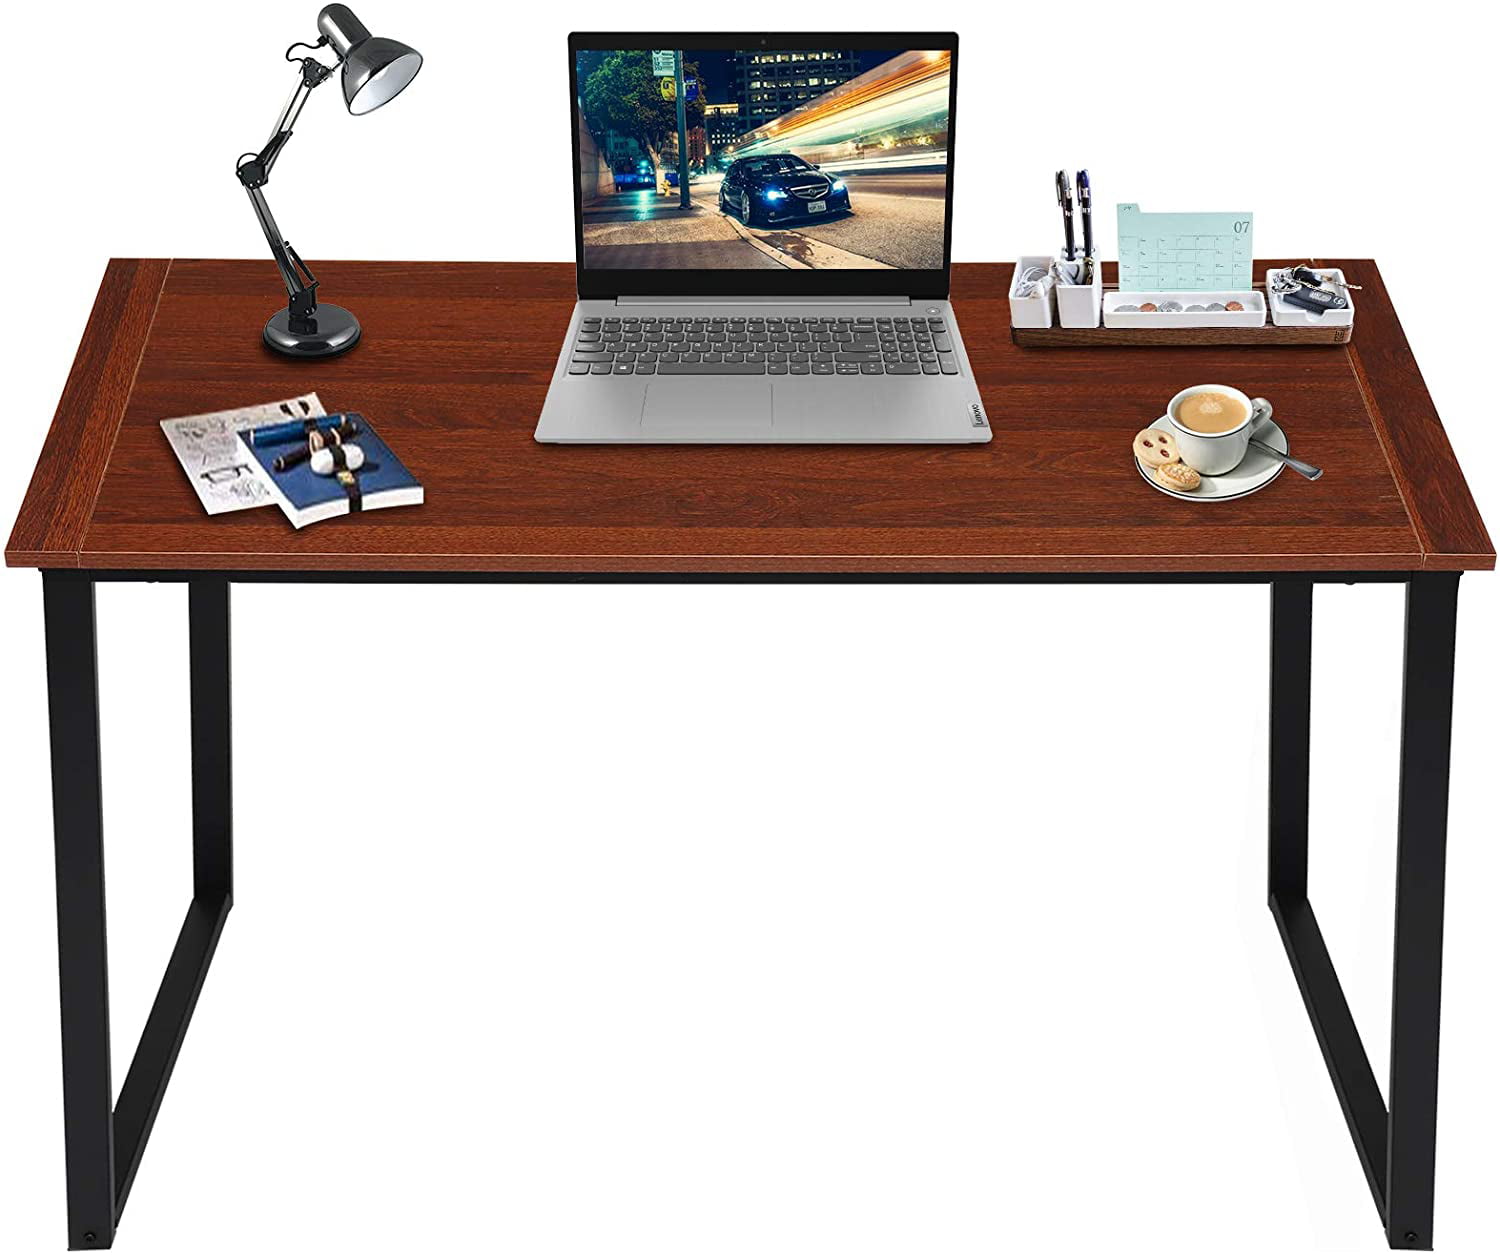 Alecono Sturdy Writing Desk with Raised Edge and Metal Frame Easy Assemble Study Desk Perfect Home Office Writing Workstation Computer Desk Black 47 Black